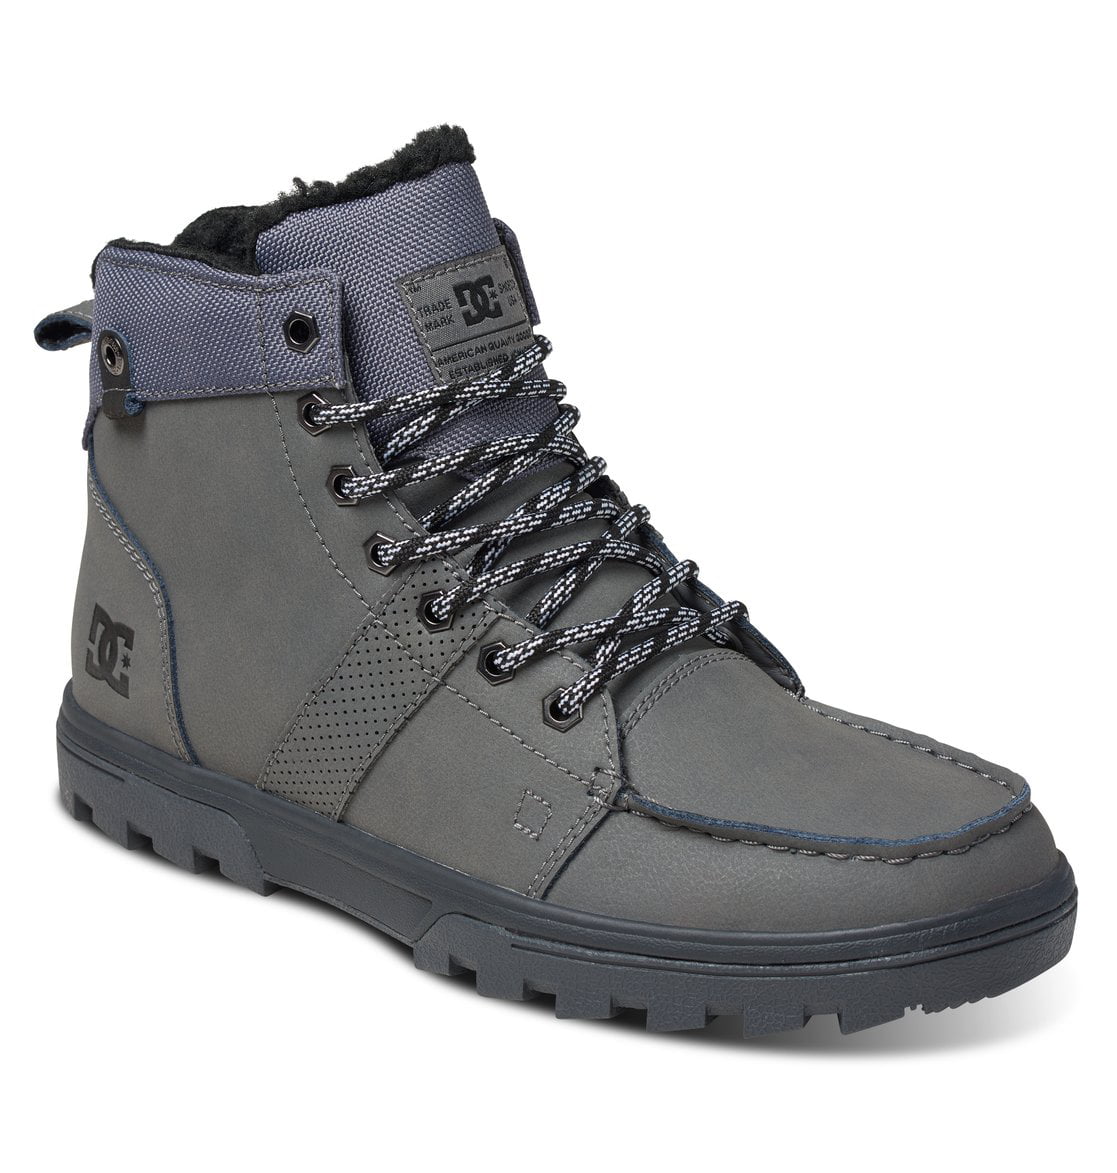 Woodland Snow Boots Grey Leather 